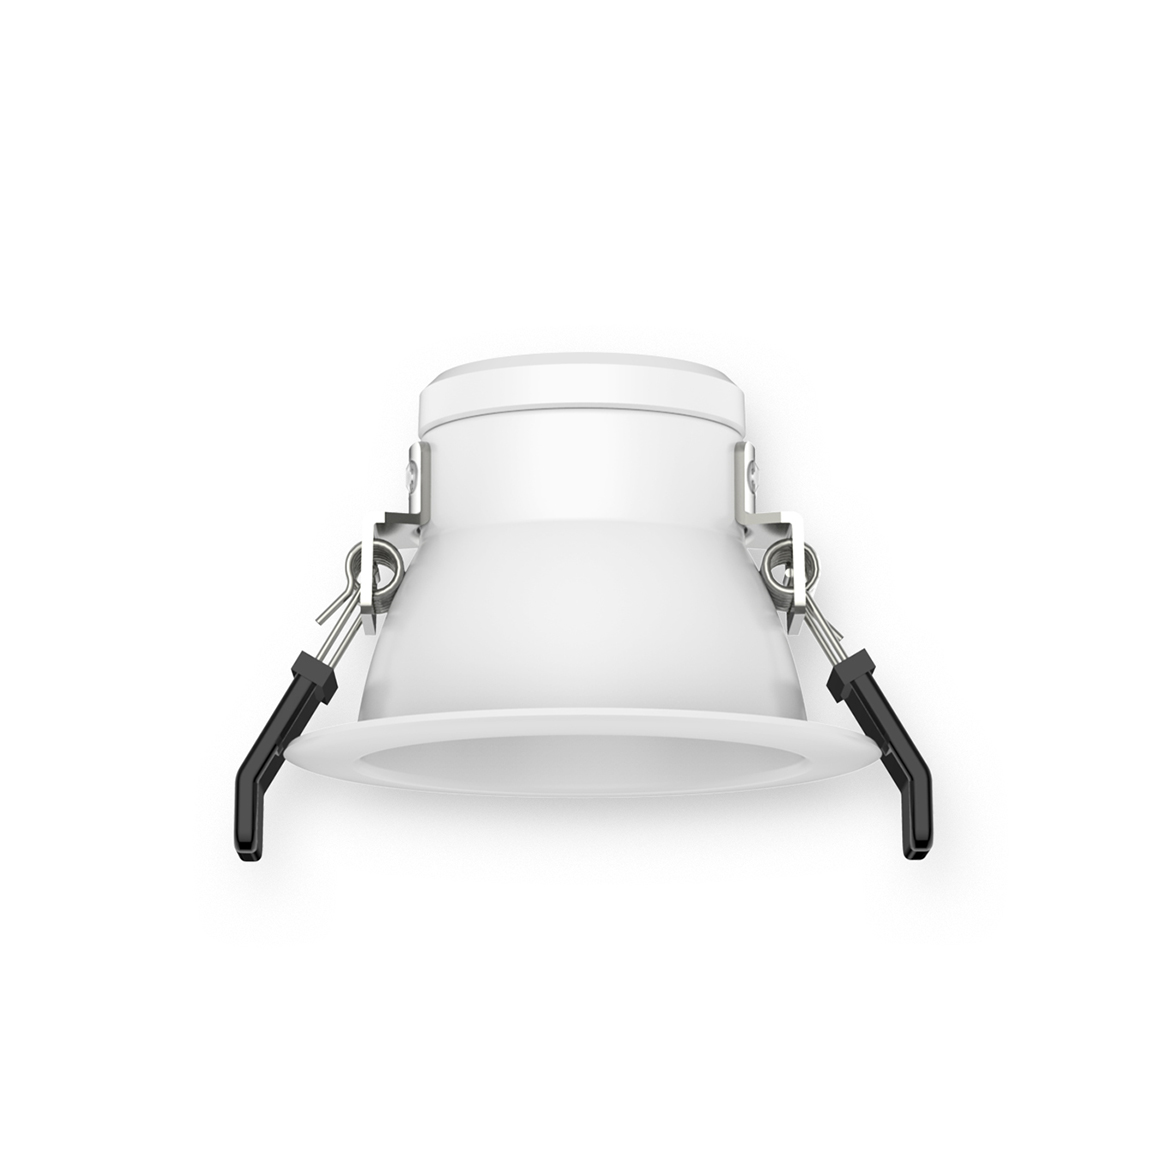 DownLight DS1 800lm